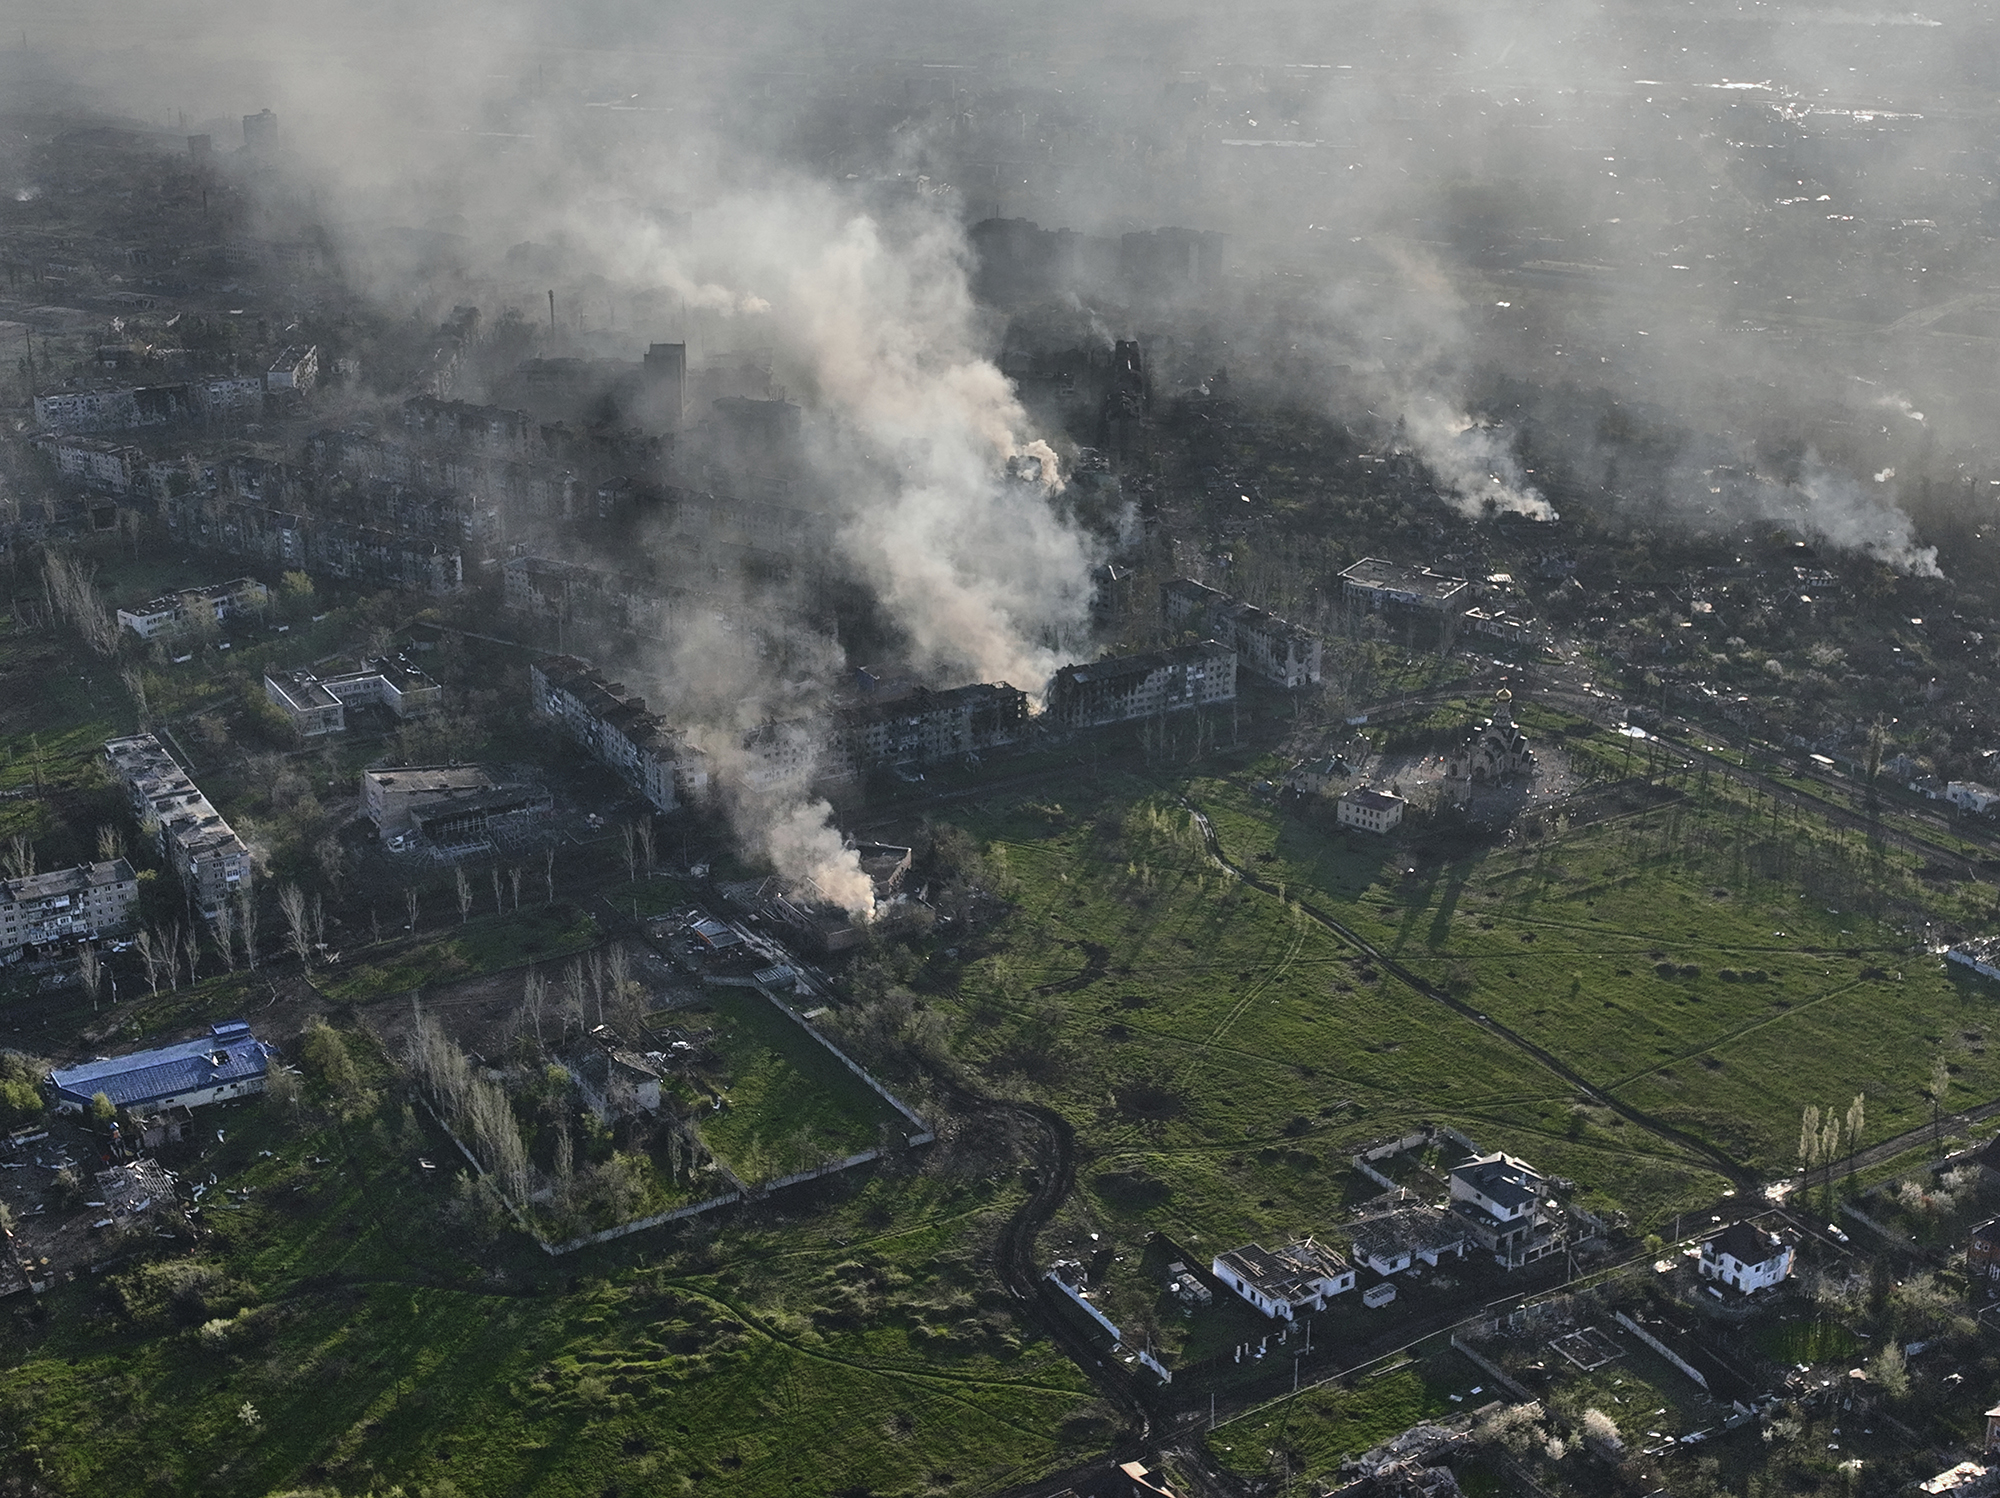 Smoke rises from buildings in this aerial view of Bakhmut, Ukraine, on April 26.